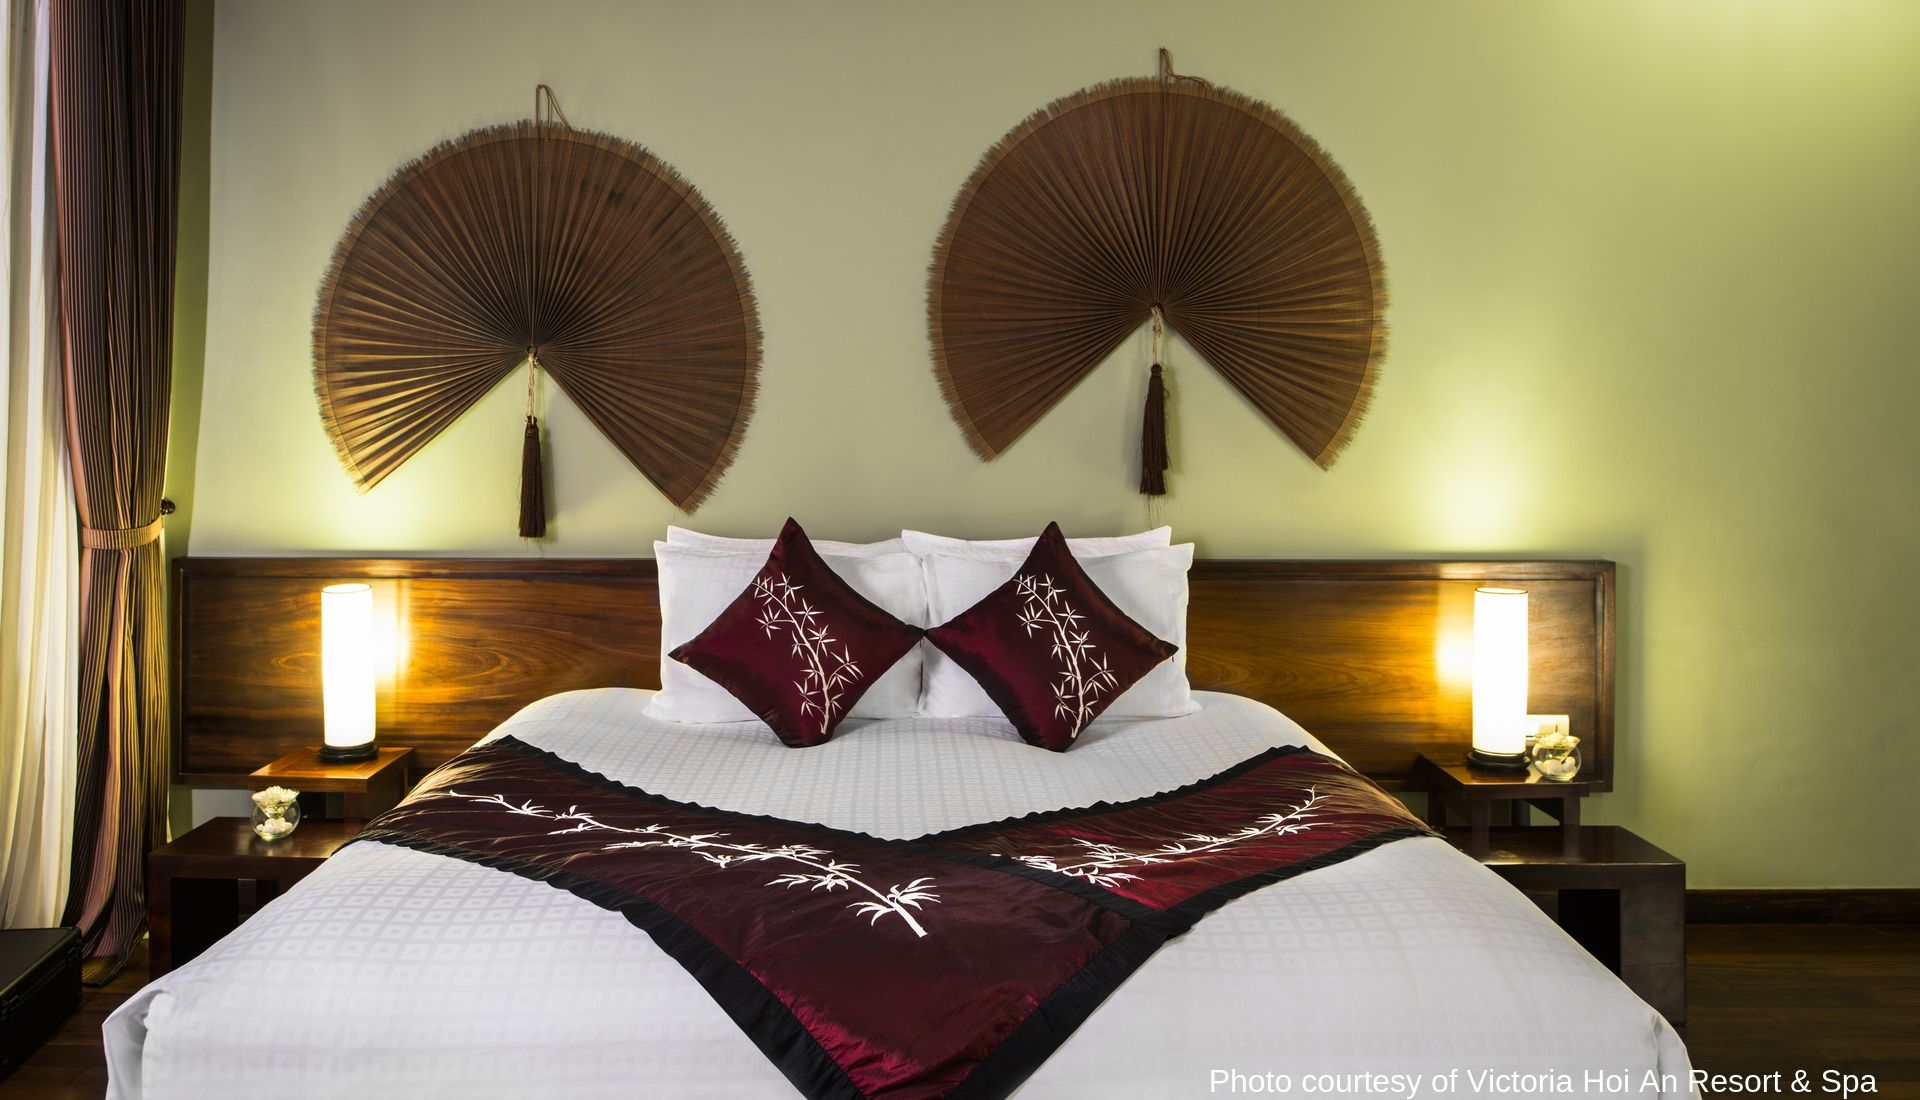 Junior Suite at the Victoria Hoi An Resort & Spa